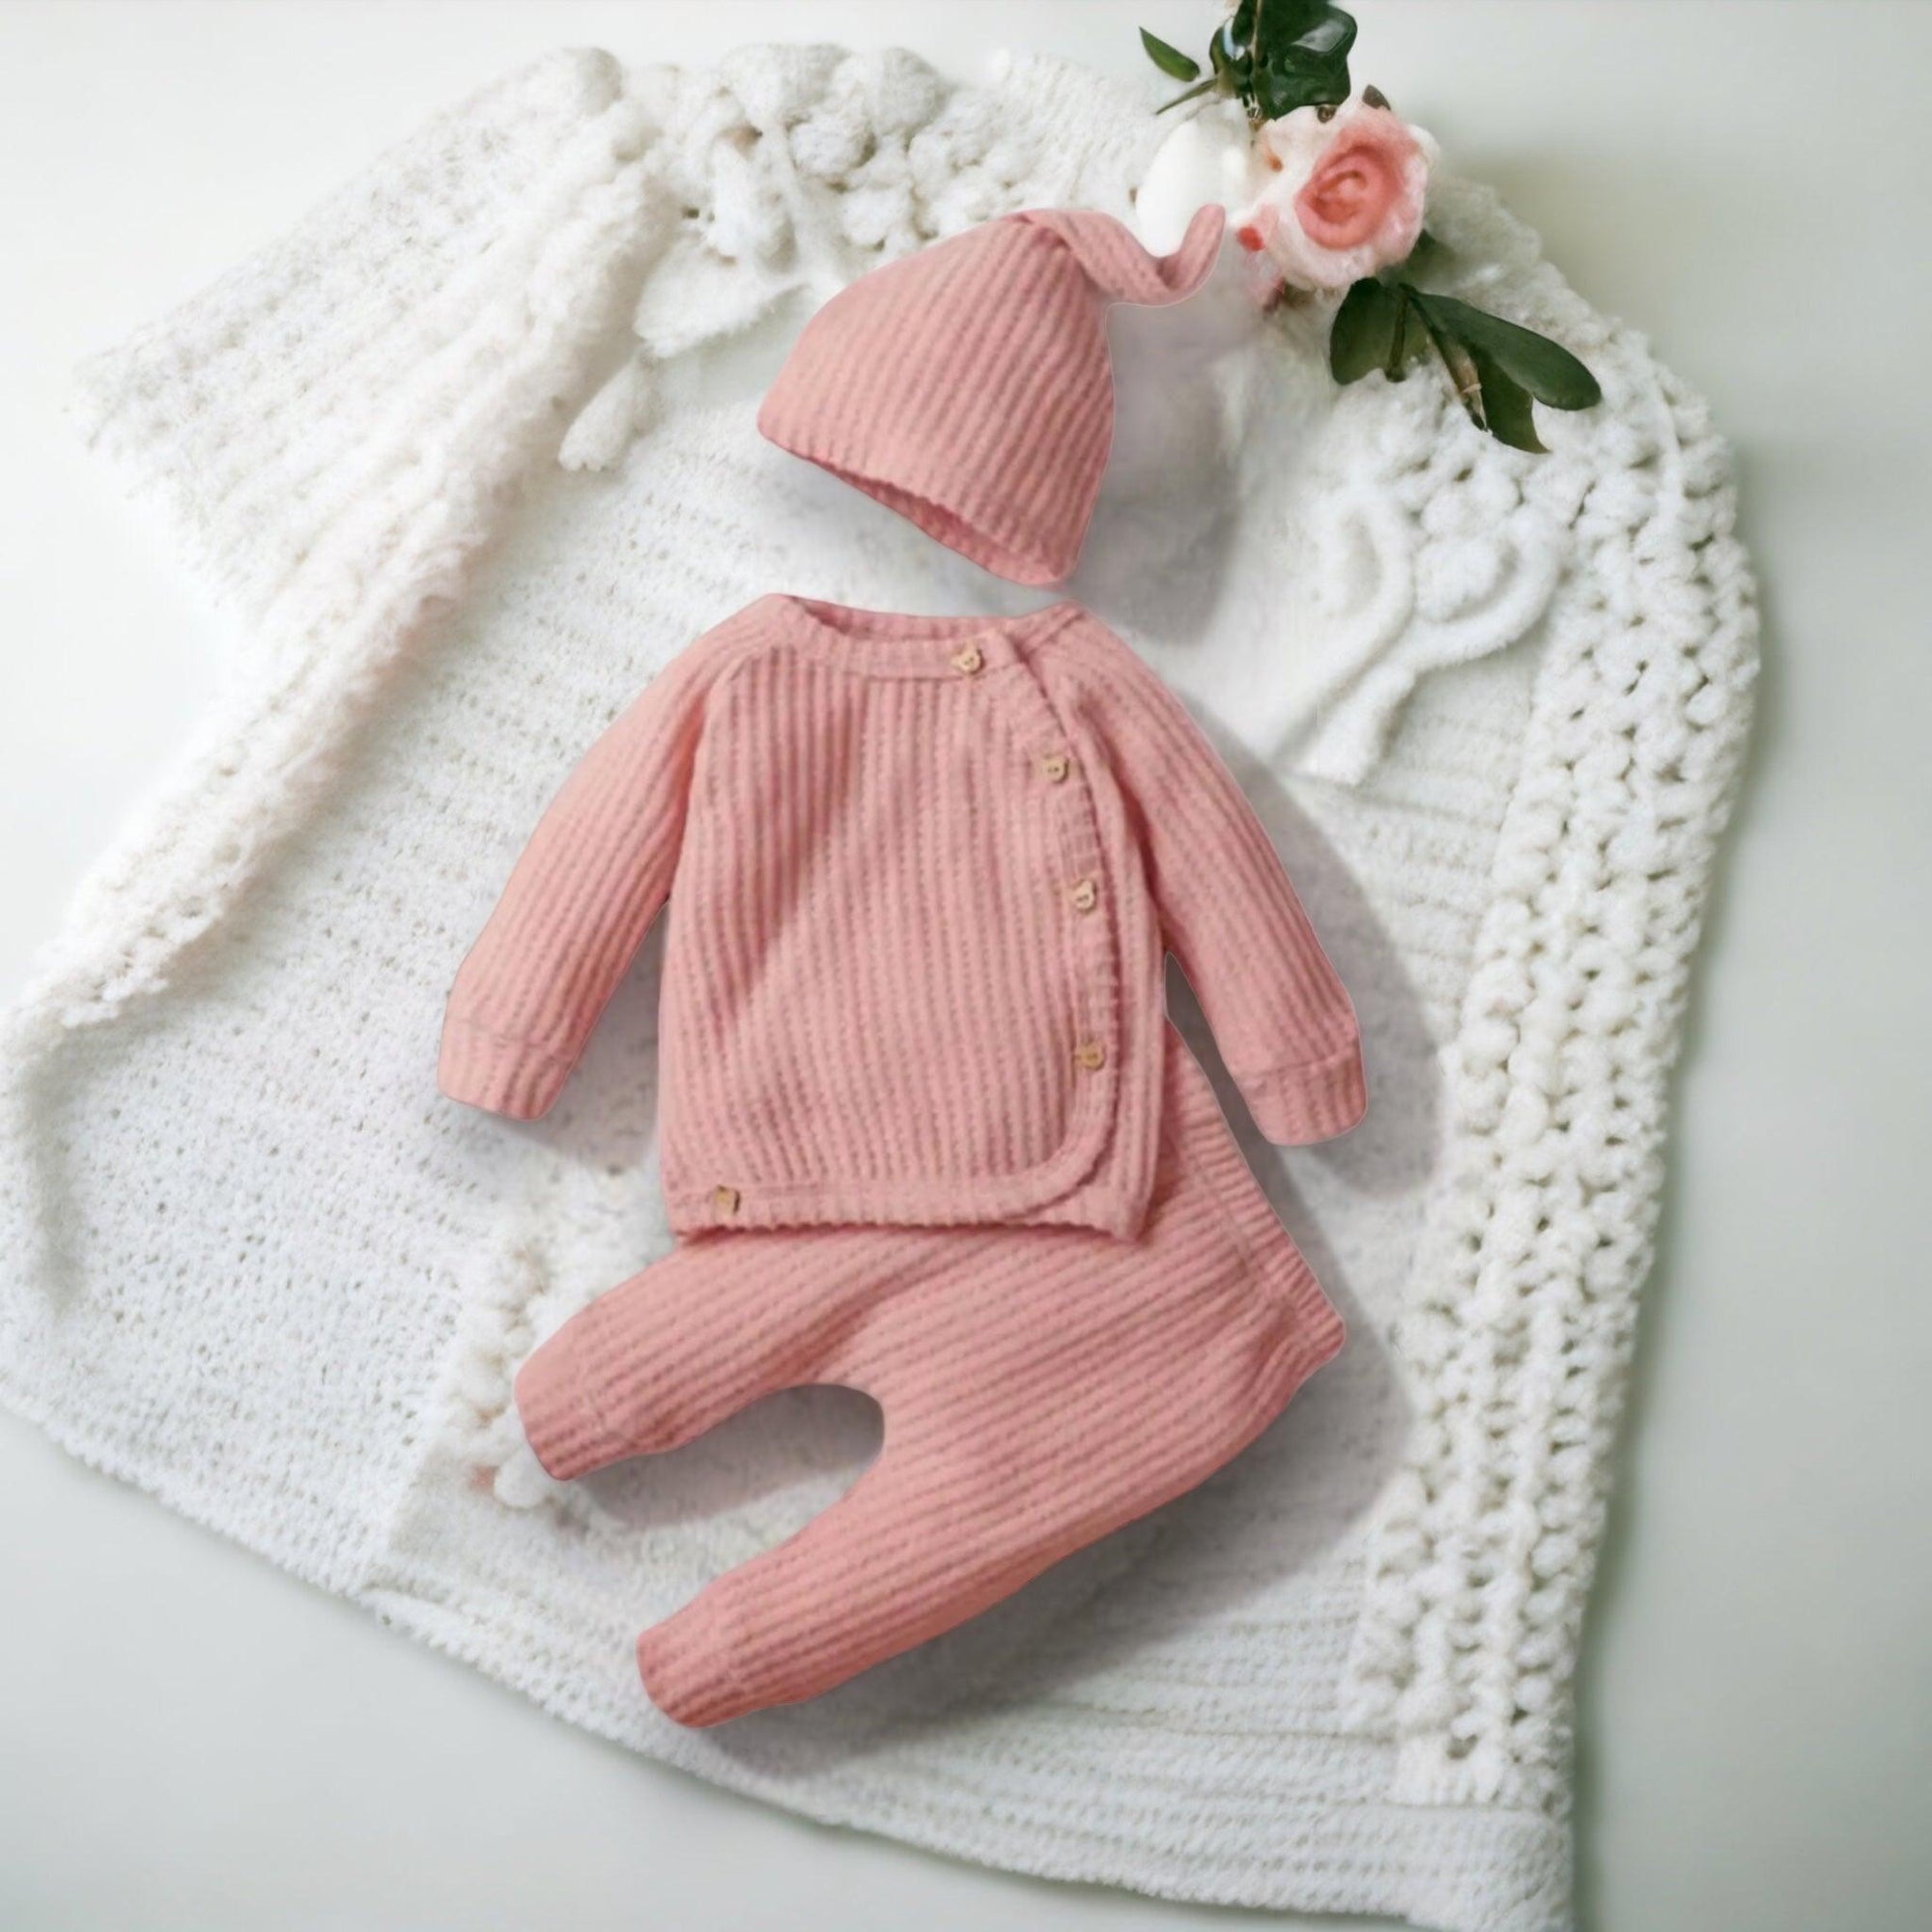 Baby Toddler Girls Pink Knit Sweater Three Piece Clothing Set, Color